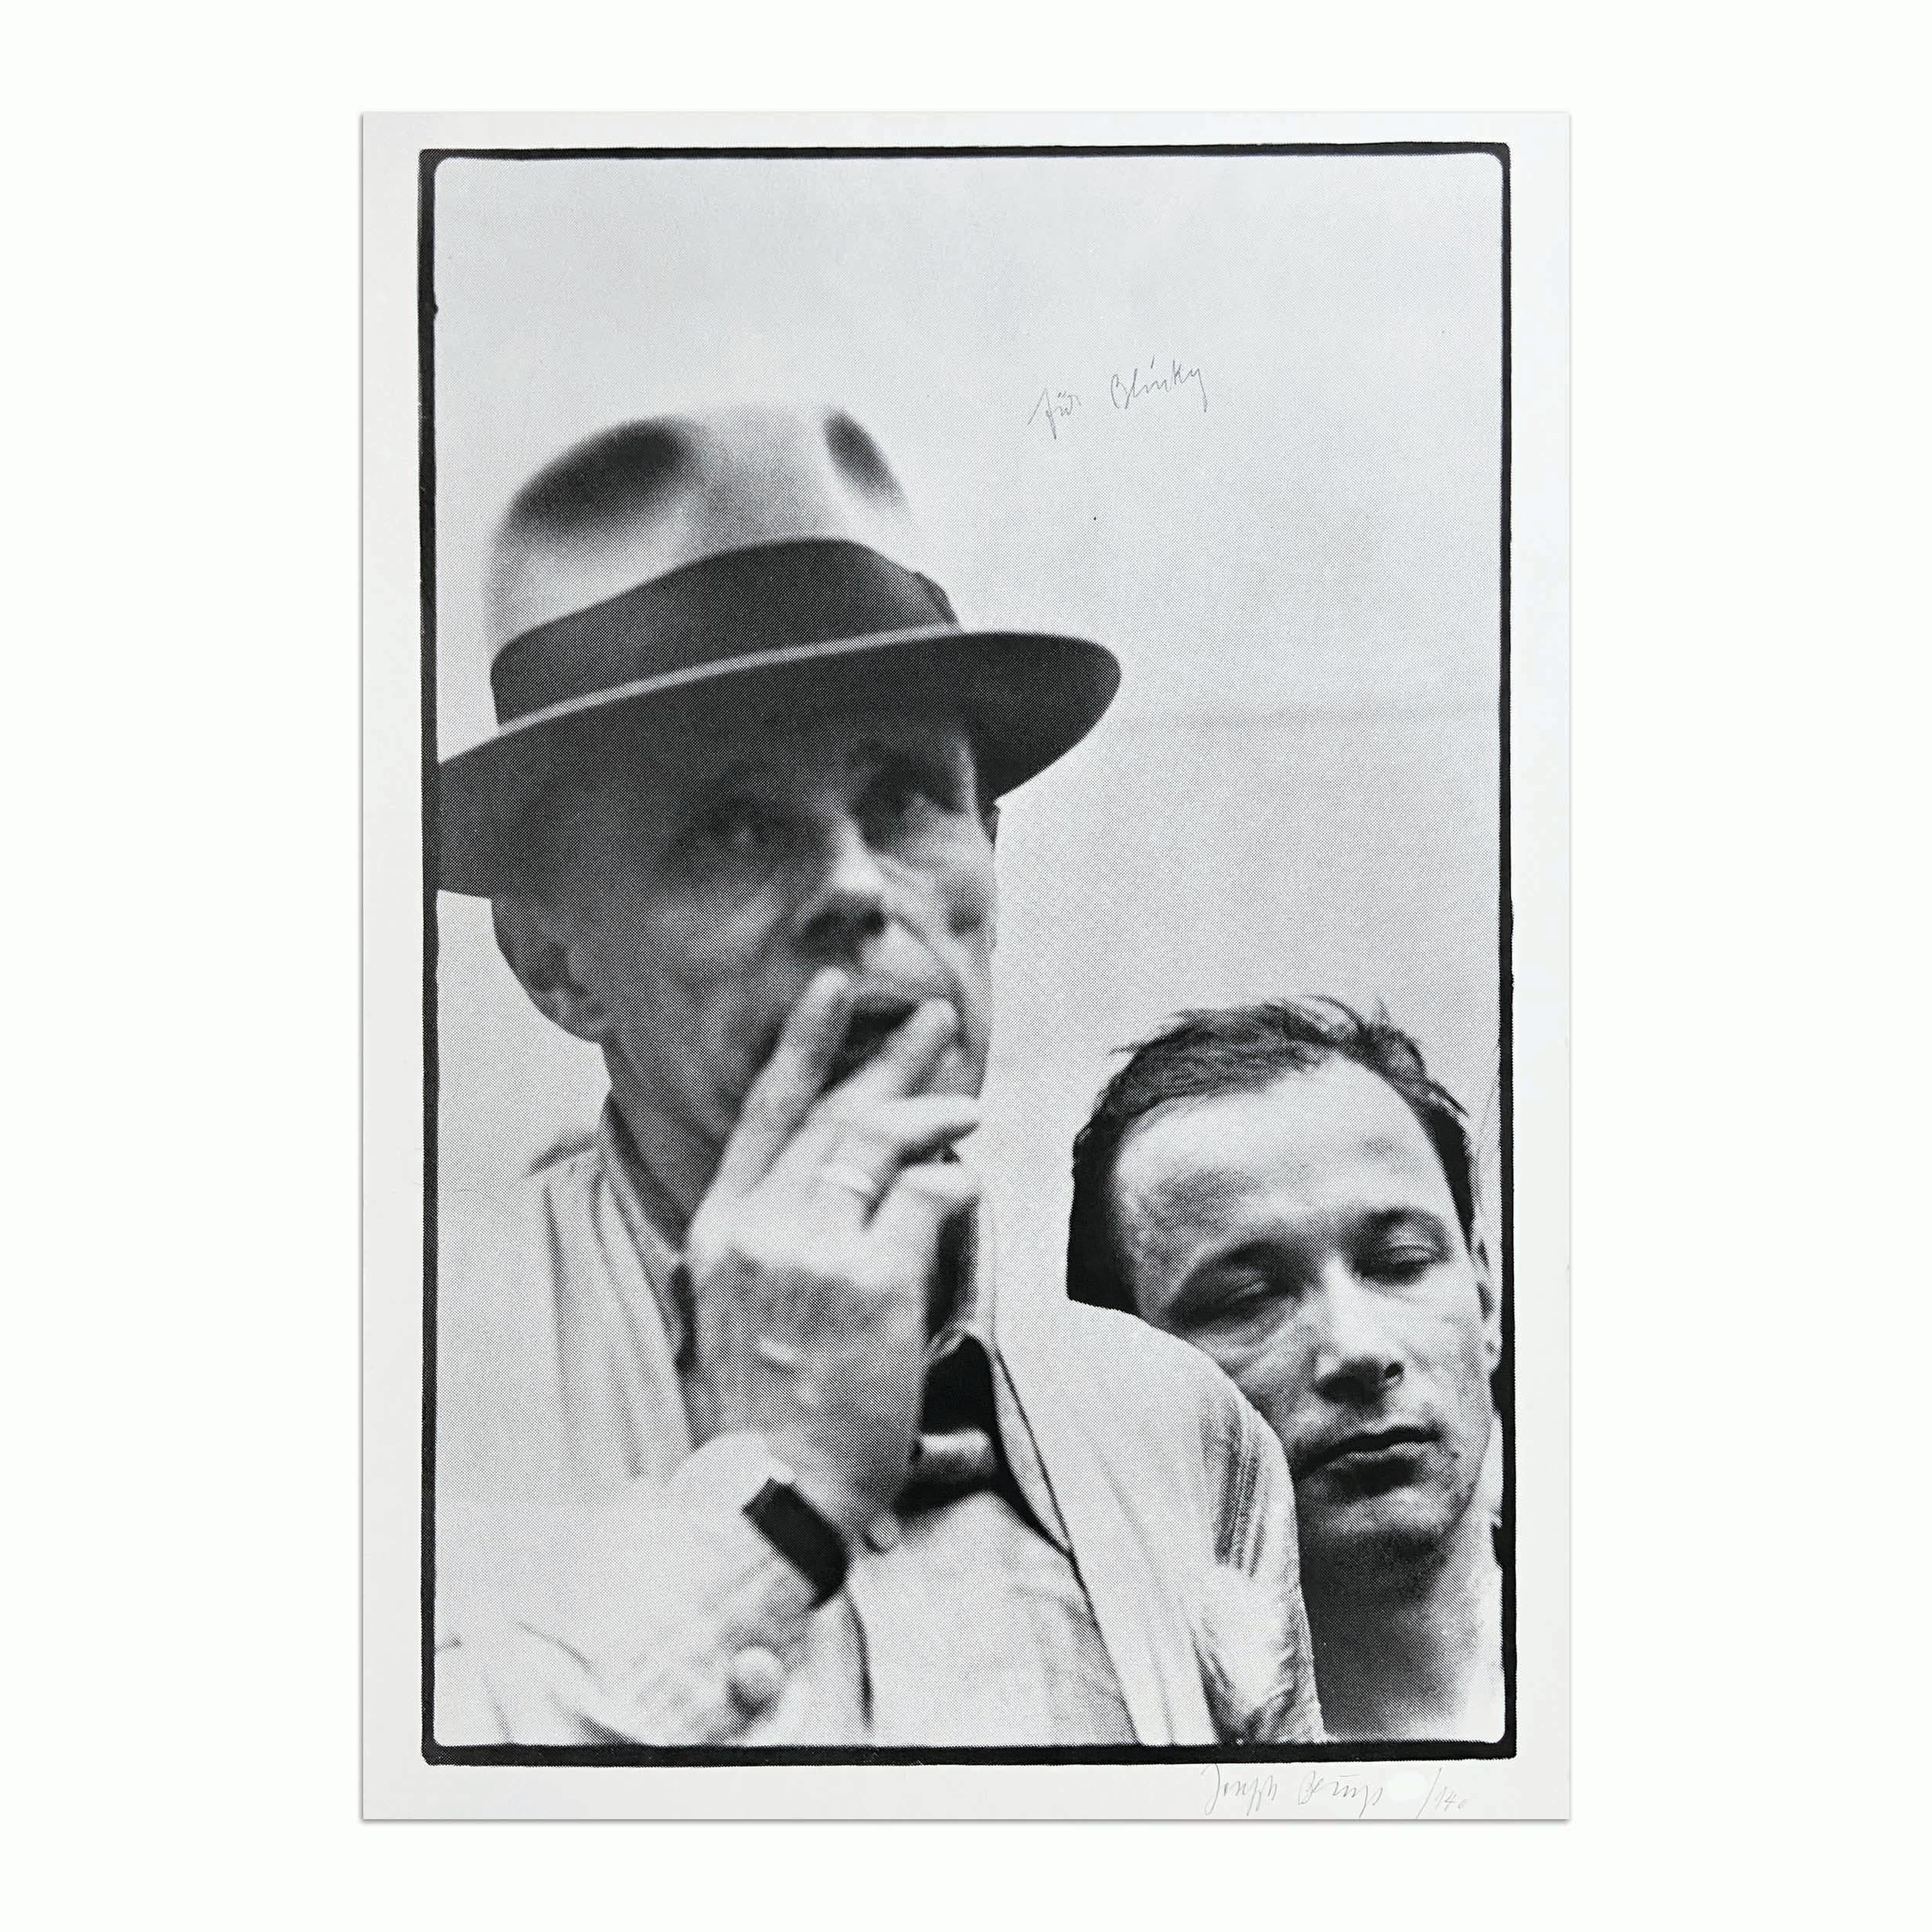 Joseph Beuys (German, 1921-1986)
Für Blinky, 1980
Medium: Screenprint and pencil on cardstock
Dimensions: 84.5 x 59.4 cm (33.3 x 23.4 in)
Edition of 140: Hand signed and numbered in pencil
Publisher: Galerie Klein, Bonn
Catalogue raisonné: